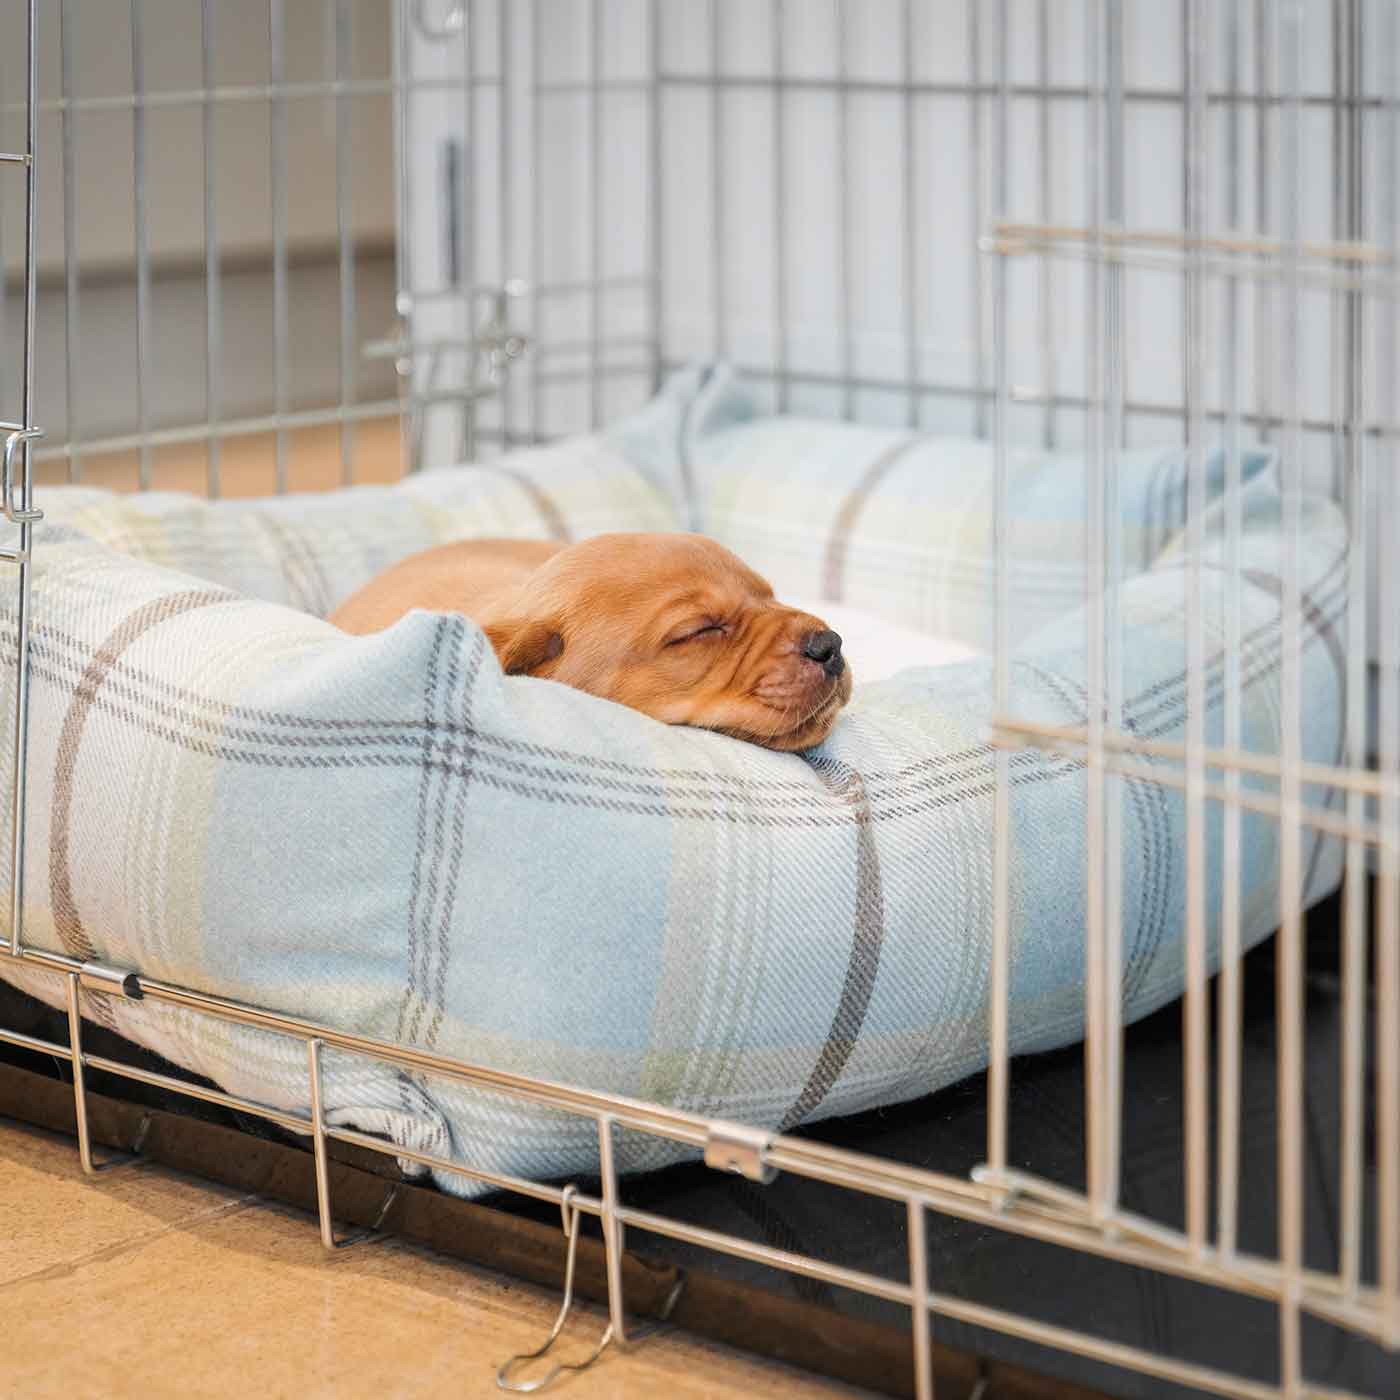  Cosy & Calm Puppy Crate Bed, The Perfect Dog Crate Accessory For The Ultimate Dog Den! In Stunning Duck Egg Tweed! Available Now at Lords & Labradors